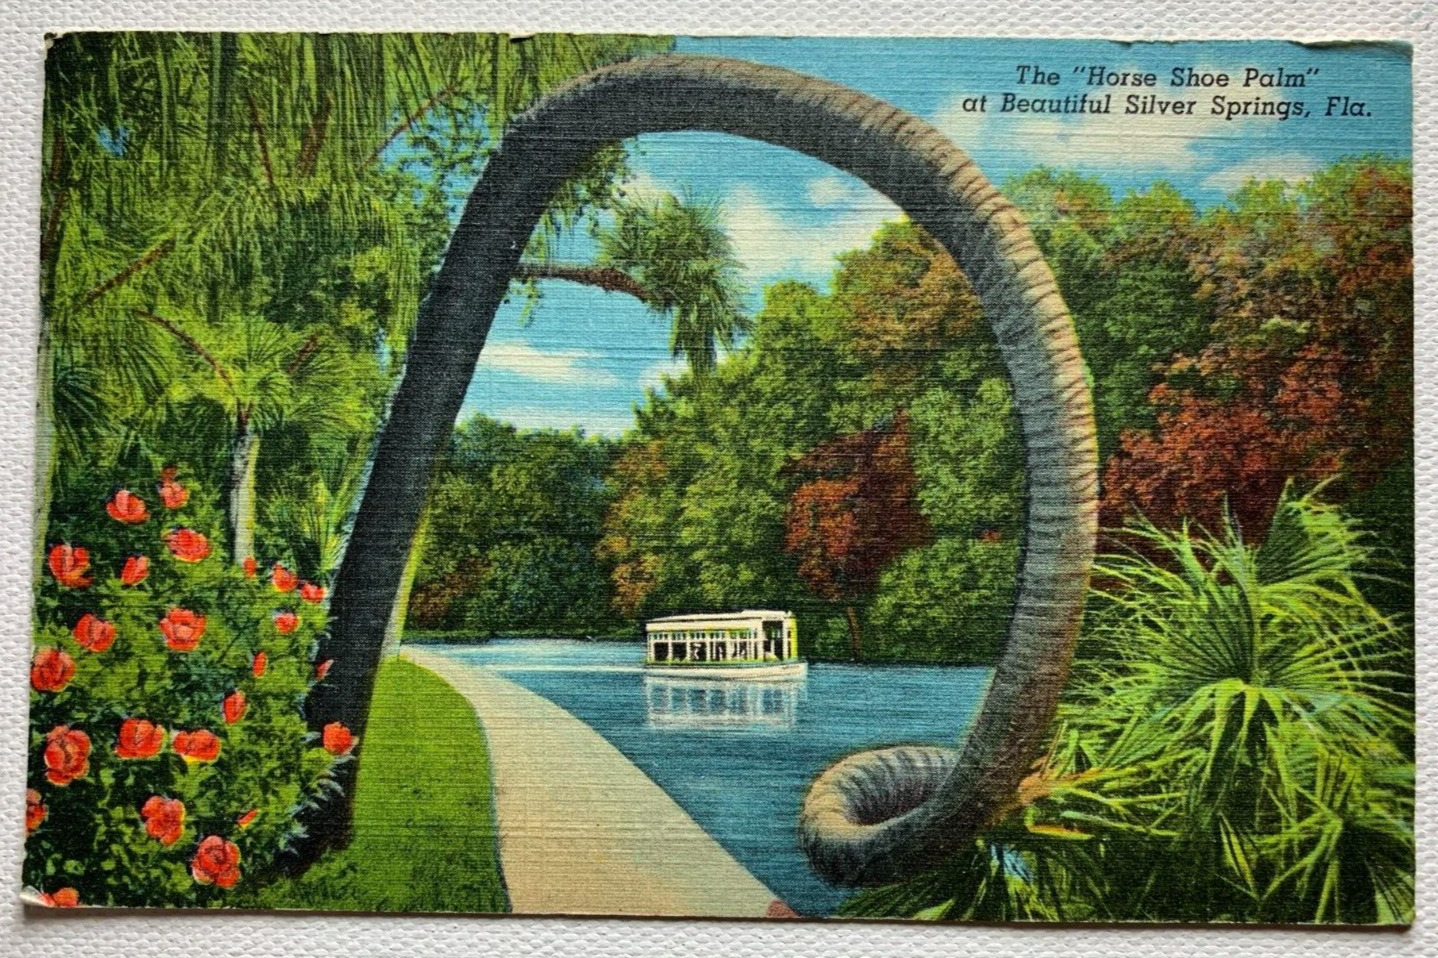 Silver Springs Florida Horse Shoe Palm Tree Posted Linen Postcard 1945 Vintage